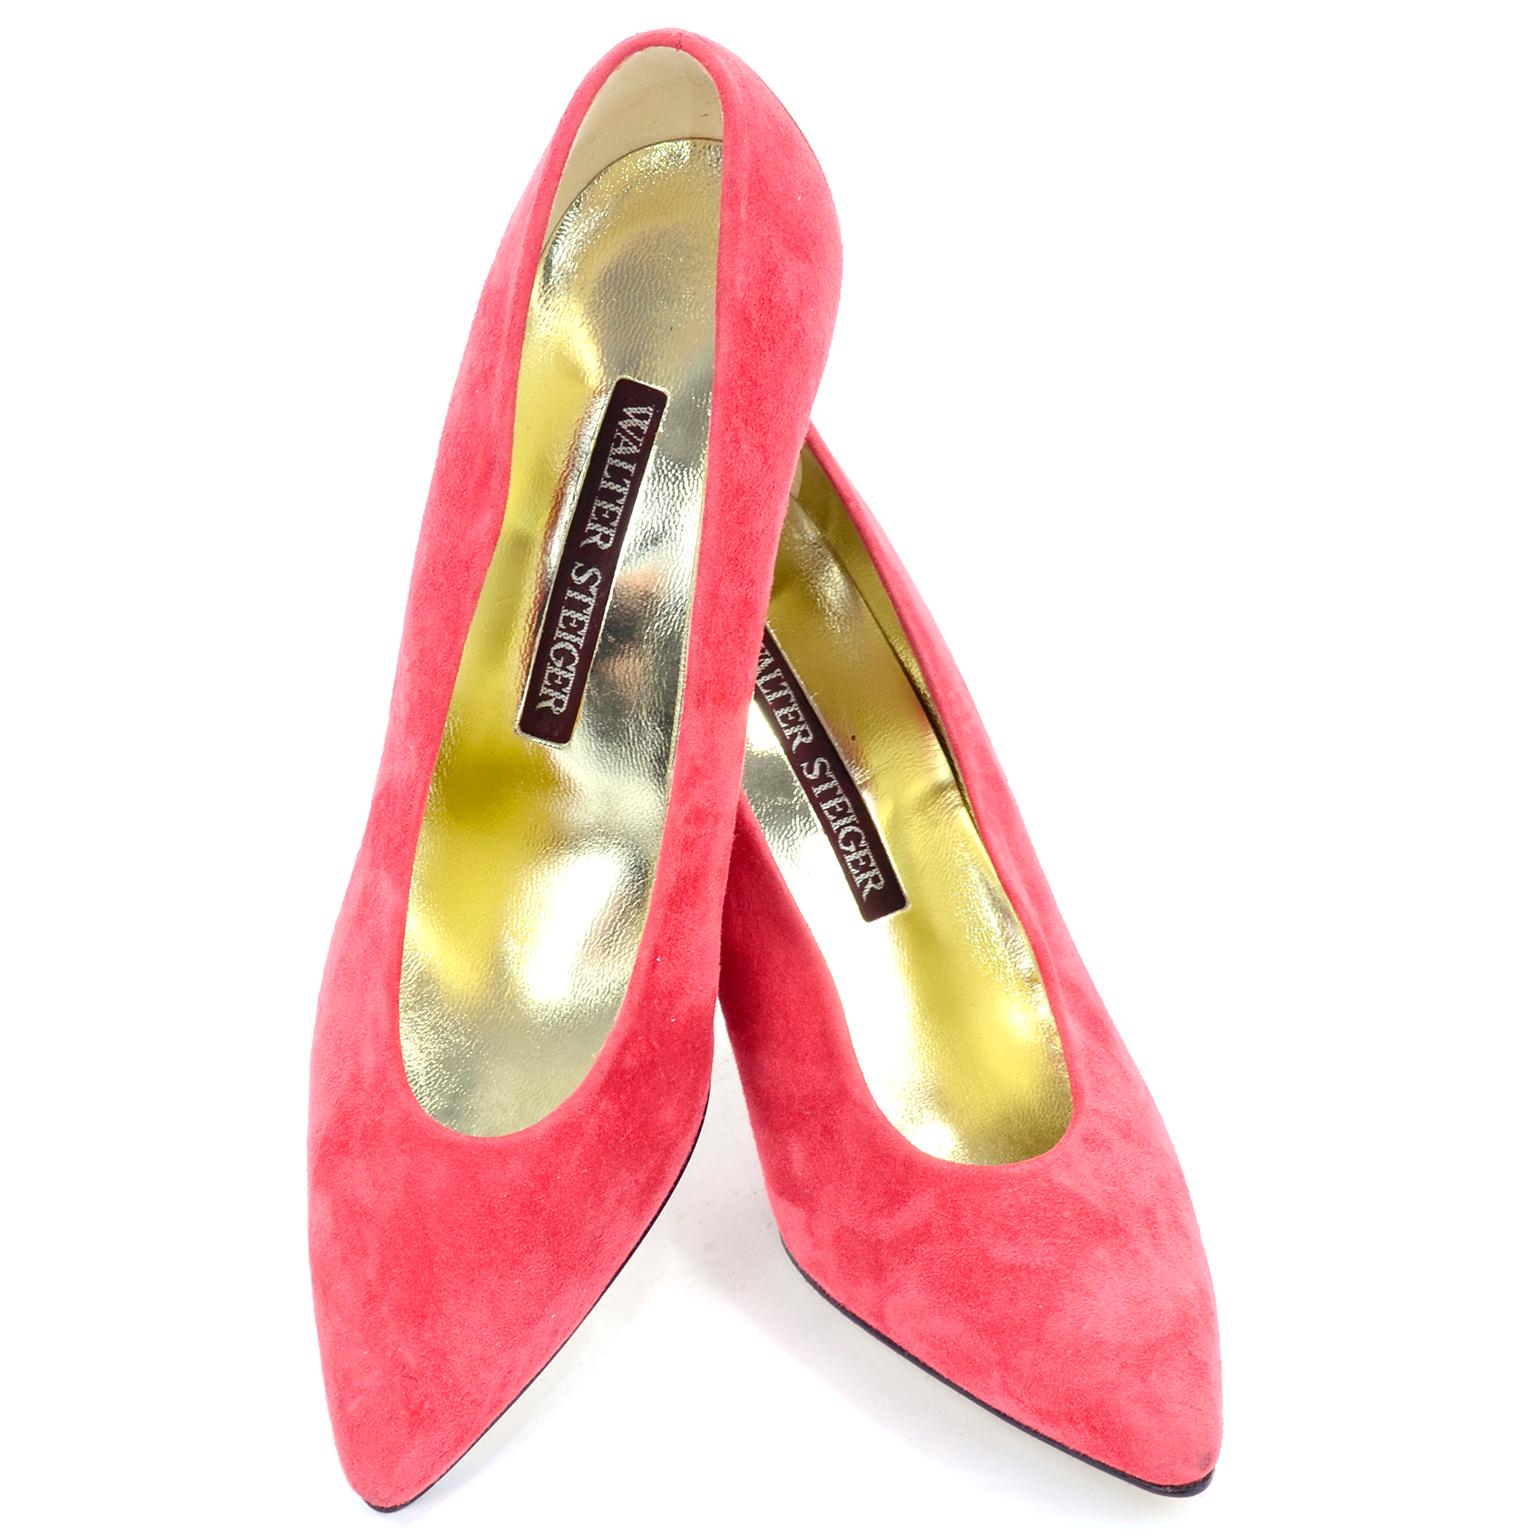 These are incredible vintage Walter Steiger shoes in a pinkish salmon or pink coral suede.  The heel bows out in the back and is made in a reflective silver metal similar to a mirror. Worn maybe once, if at all. Made in Italy, size 7AA. 
BALL WIDTH: